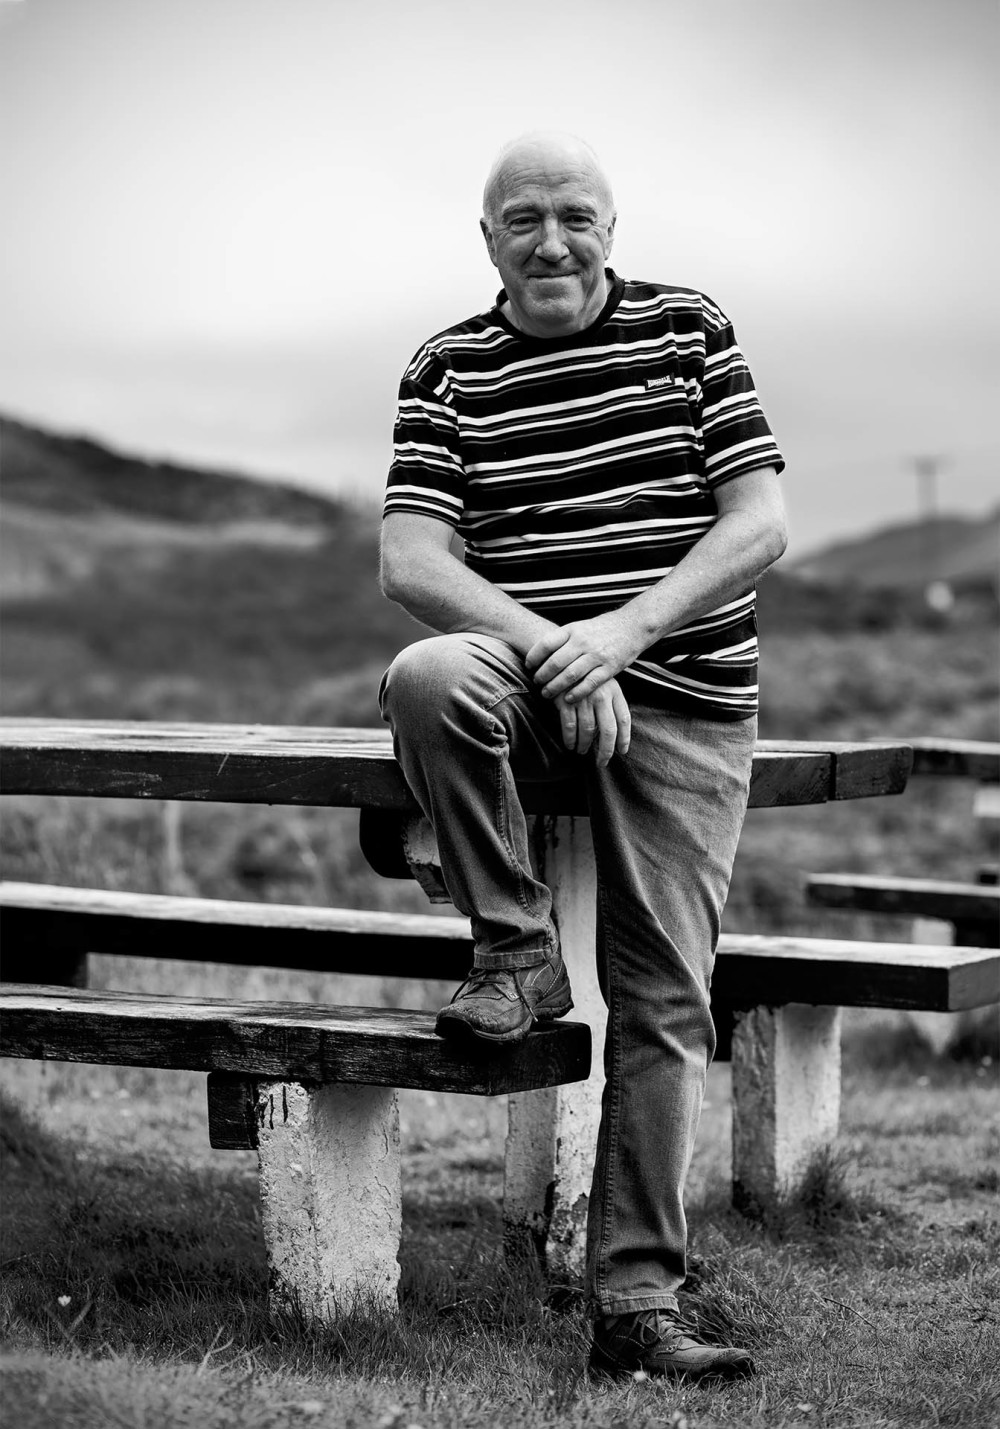 Stephen H, a service user at Men's Shed, Paisley. Photographed for Shelter Scotland's 50th anniversary by Melissa Mitchell.